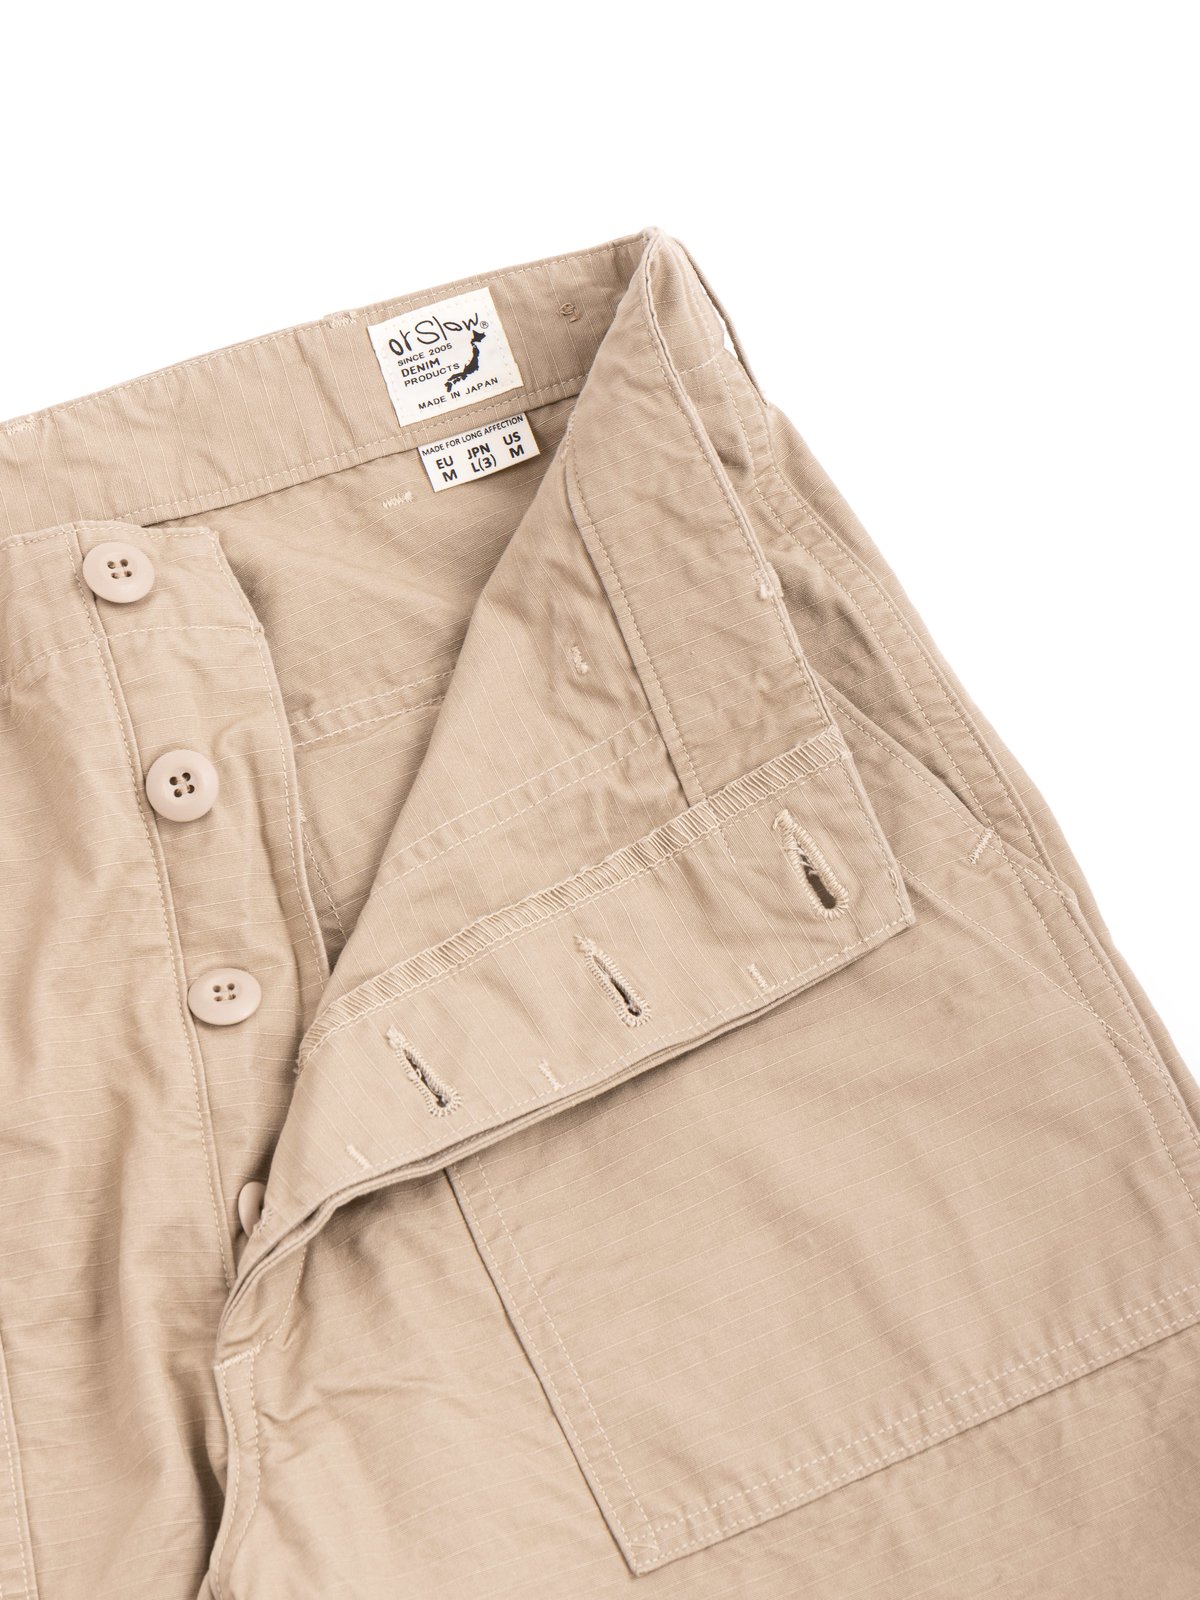 US ARMY FATIGUE PANT STANDARD FIT RIPSTOP BEIGE by orSlow – The